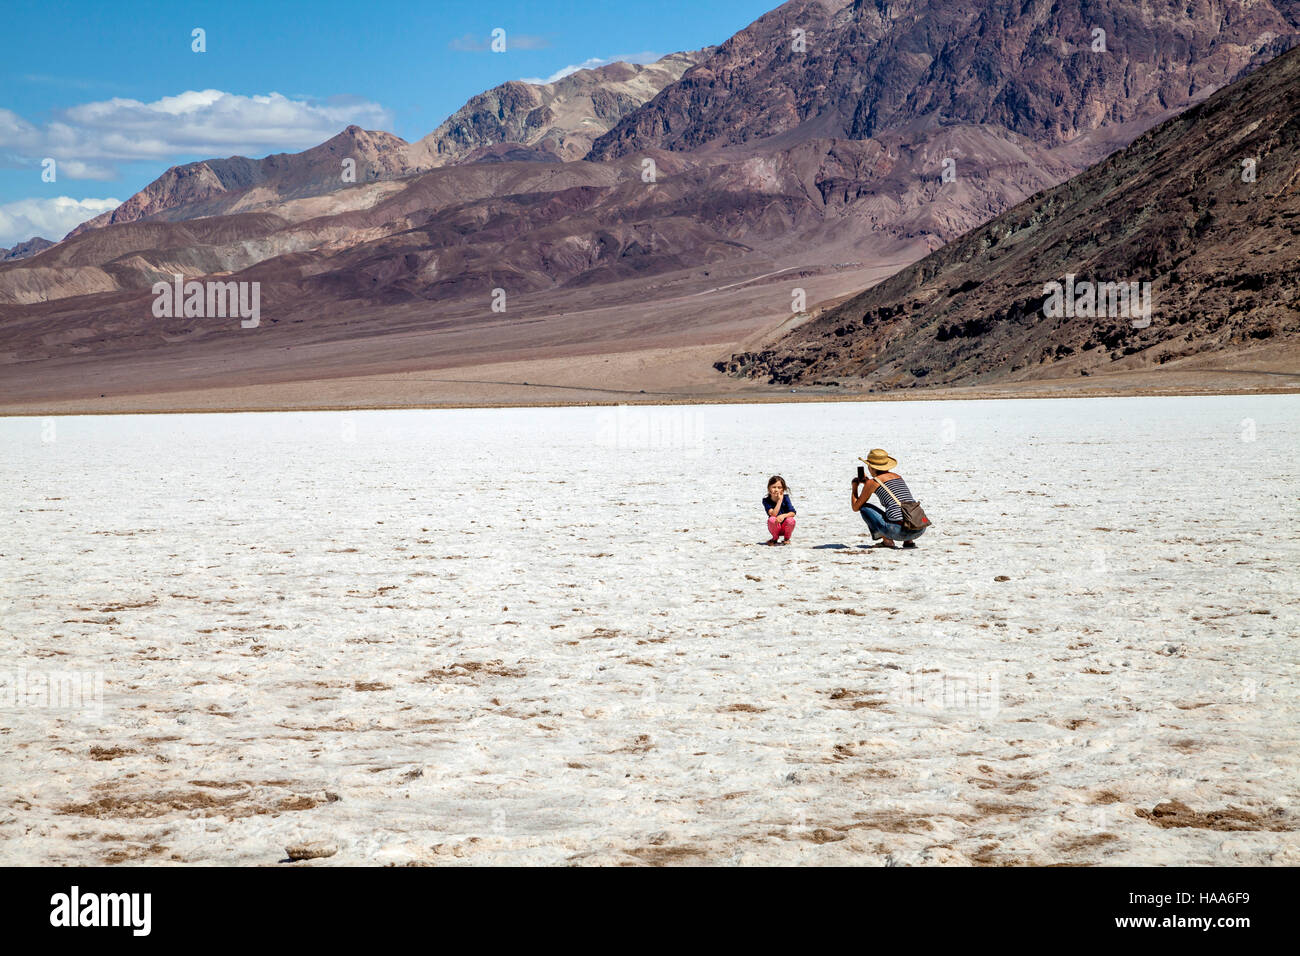 Mother photographing daughter, Badwater Basin, Death Valley National Park, California, USA Stock Photo